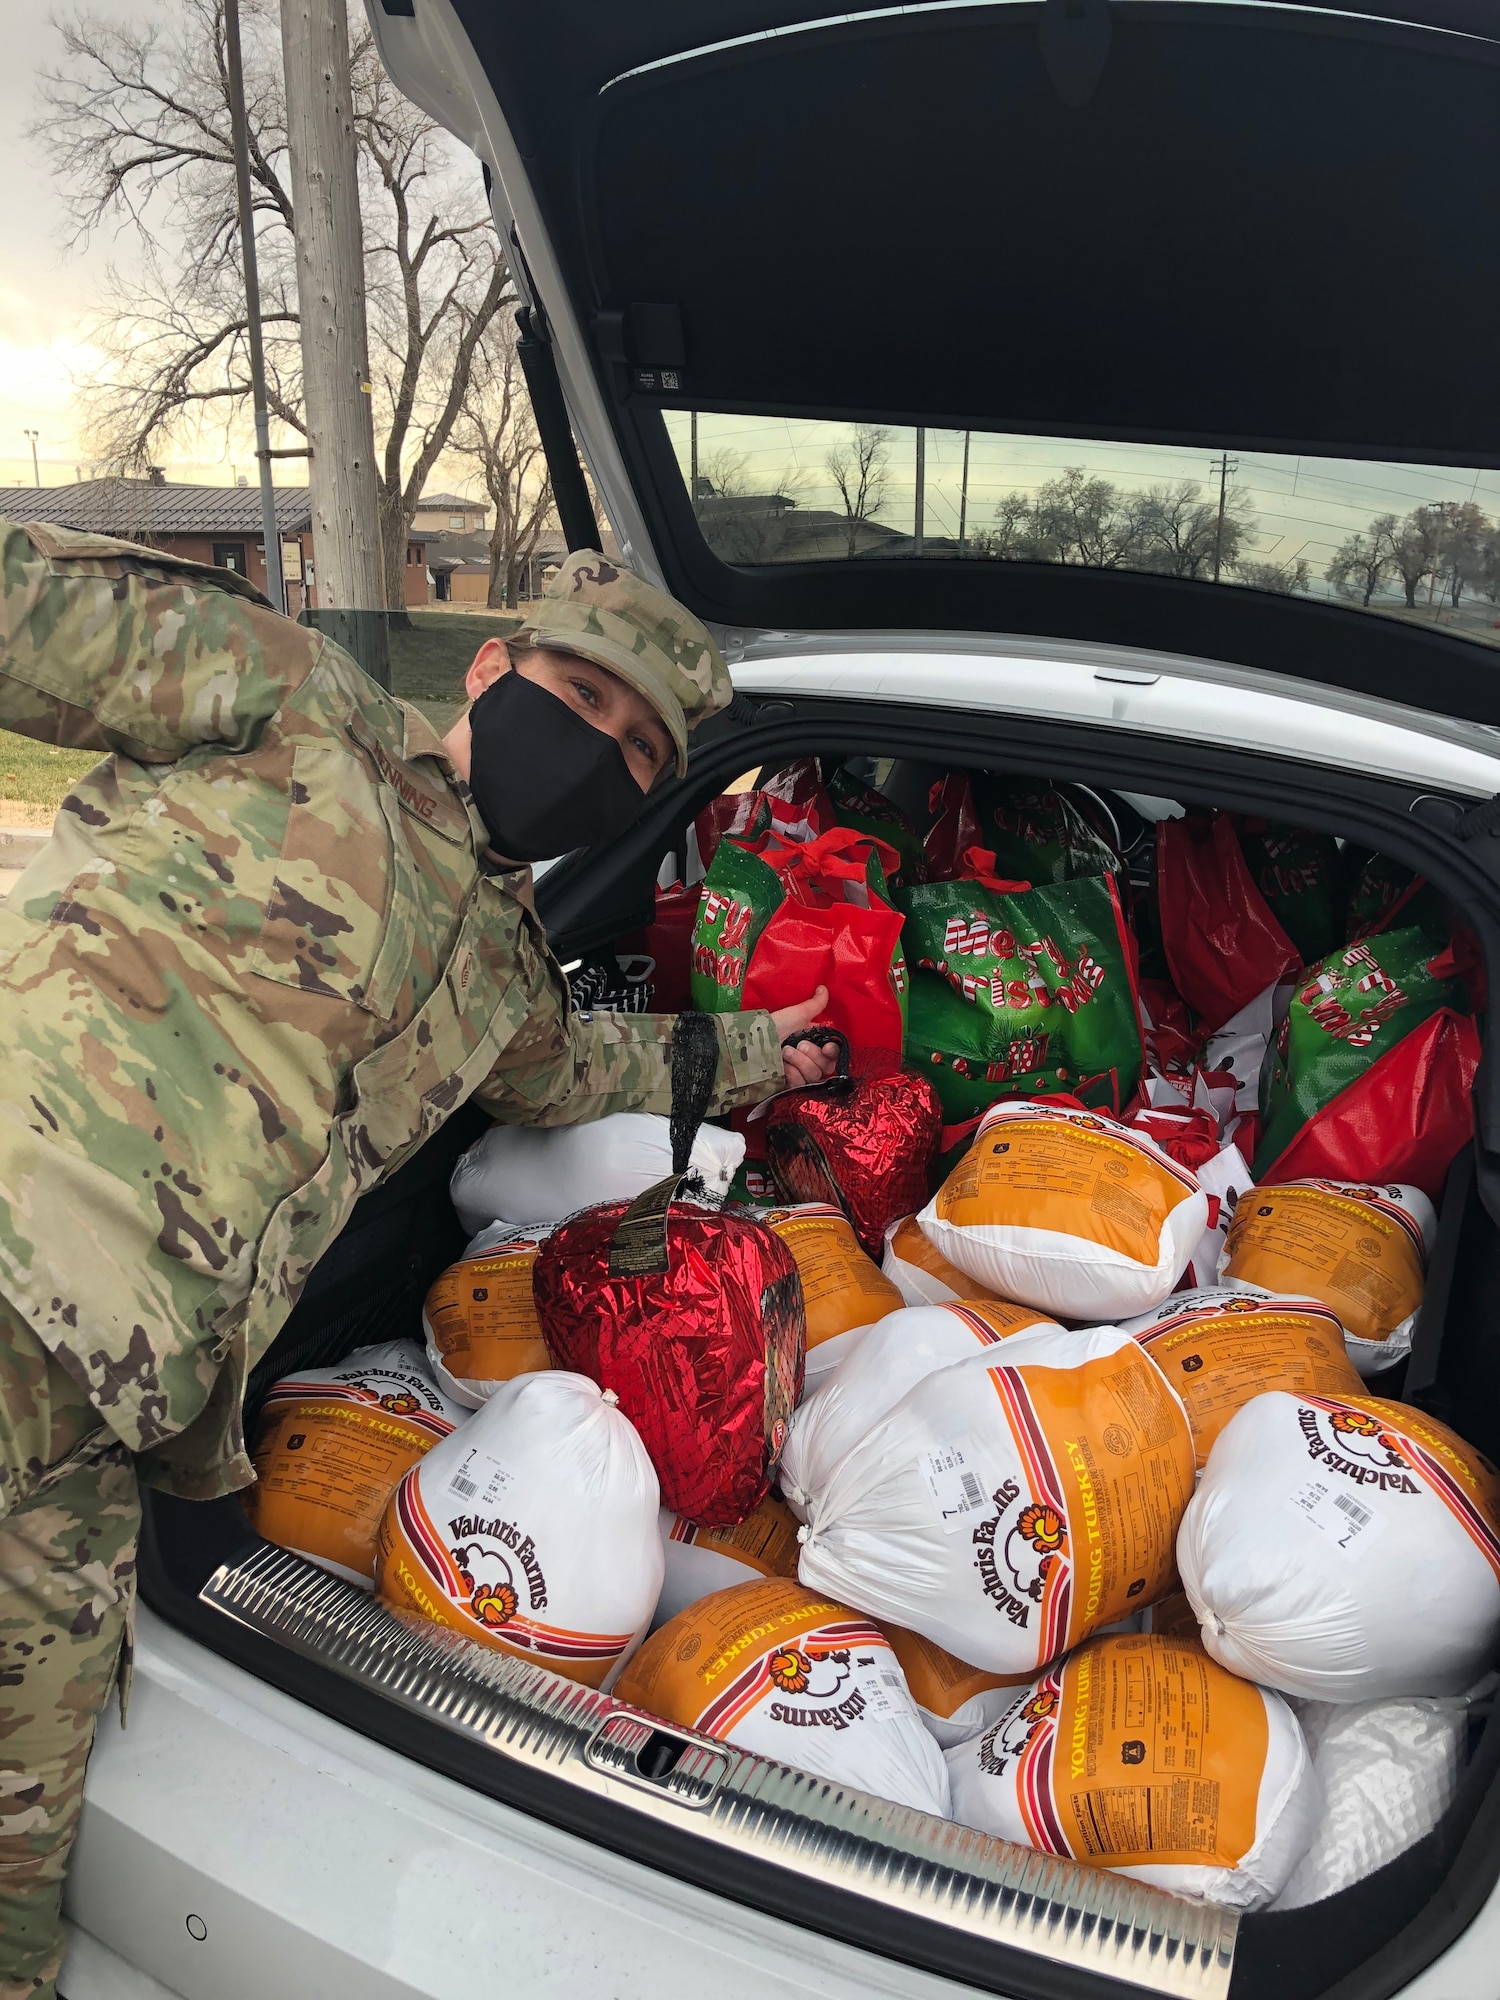 Master Sgt. Erin Henning, 388th Maintenance Group first sergeant, poses next to a trunk full of Thanksgiving food items Nov. 20, 2020, at Hill Air Force Base, Utah. Operation Warm Heart, a first sergeant’s program, teamed with the commissary to deliver bags filled with turkeys, hams and other goods items to assist Airmen and their families with the upcoming holiday. (Courtesy photo)